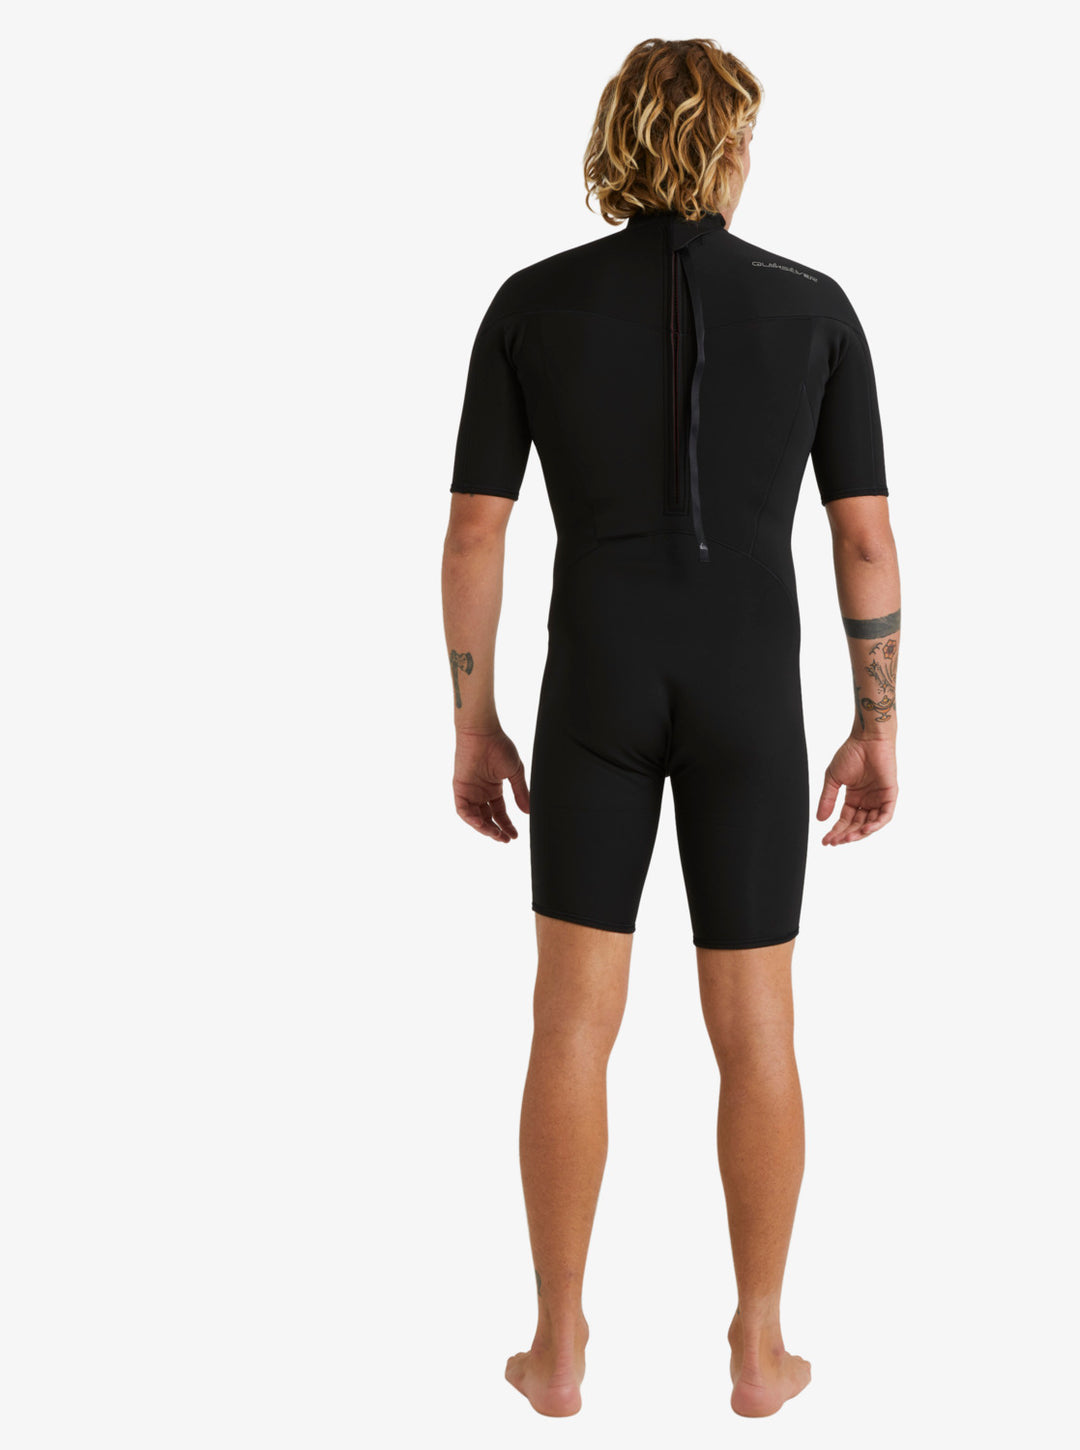 Everyday Sessions 2/2 Chest Zip Springsuit Wetsuit - Black